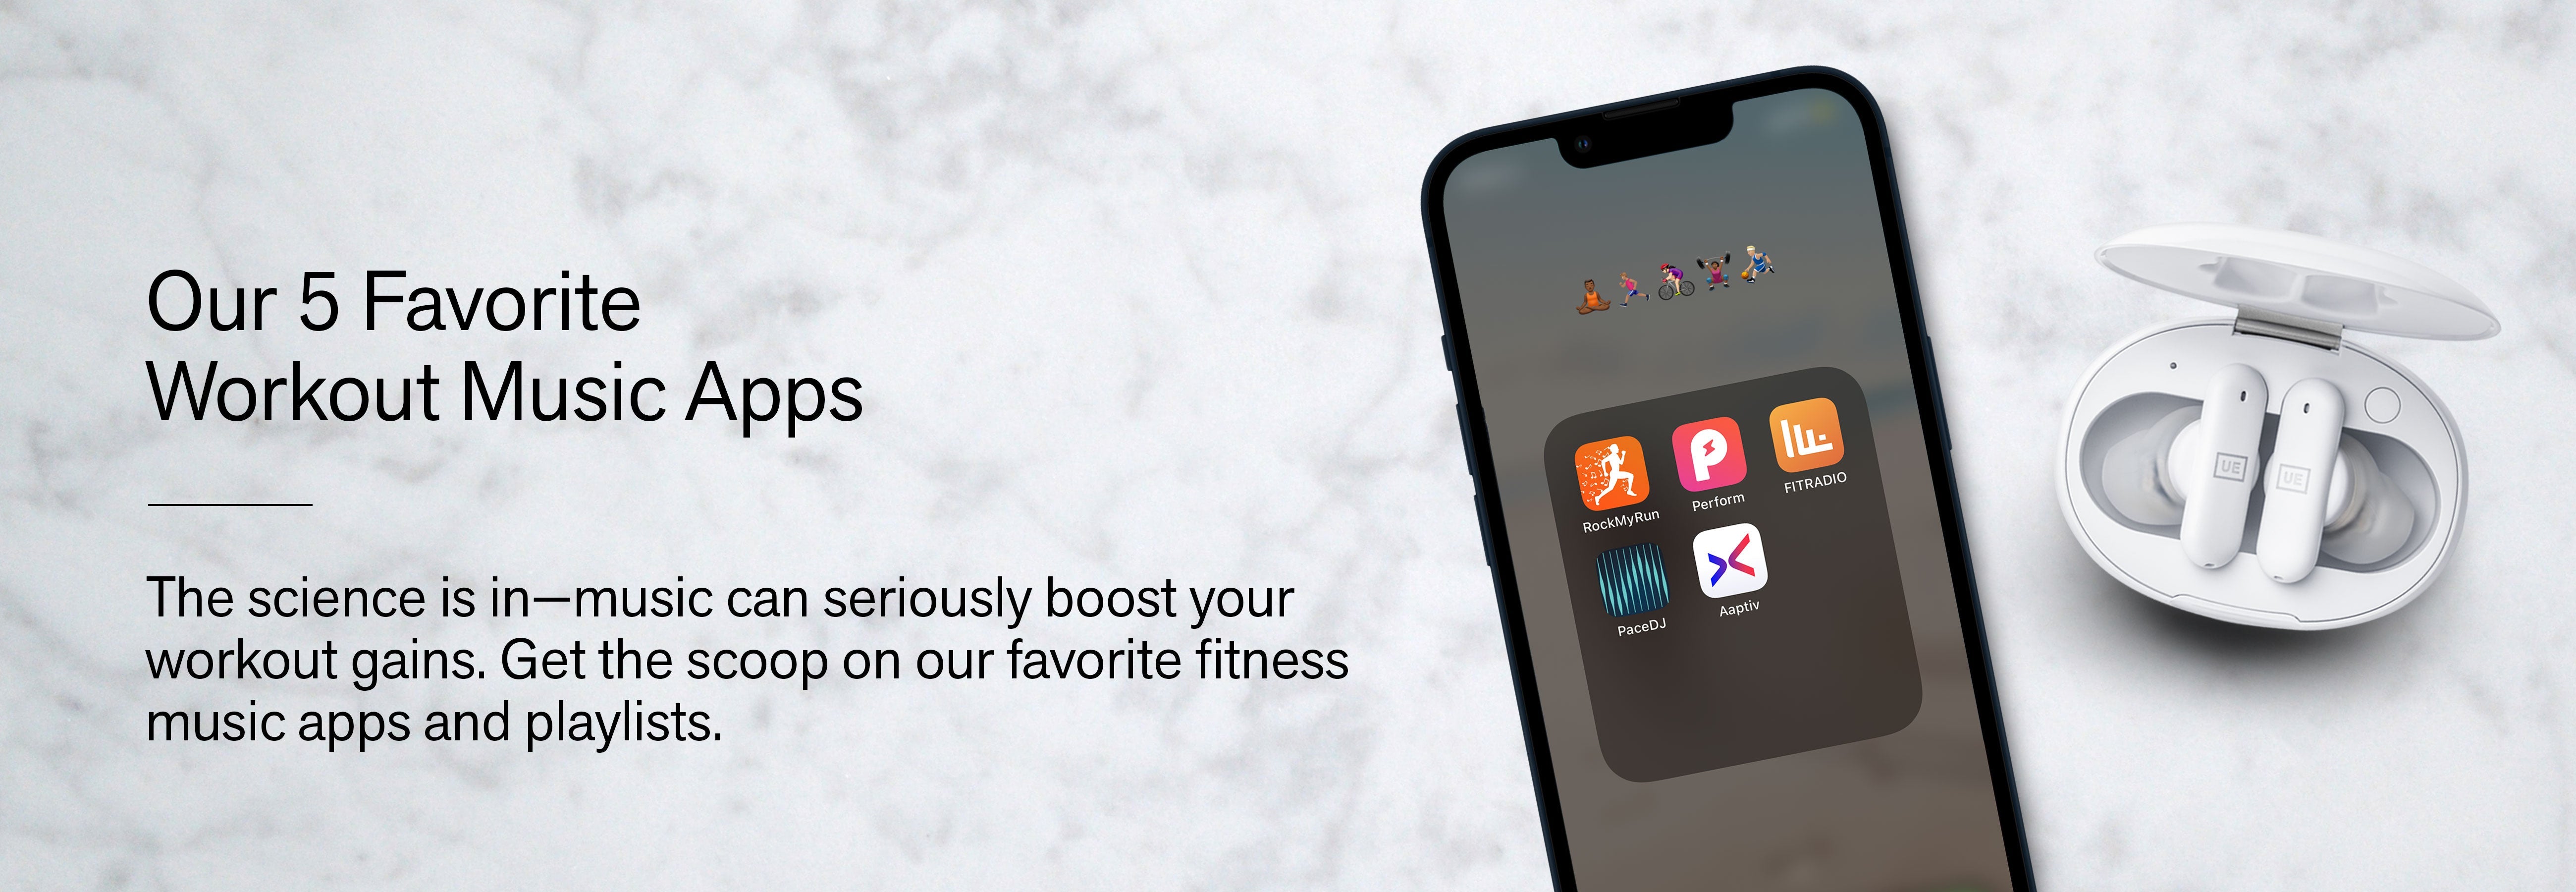 Our 5 Favorite Workout Music Apps